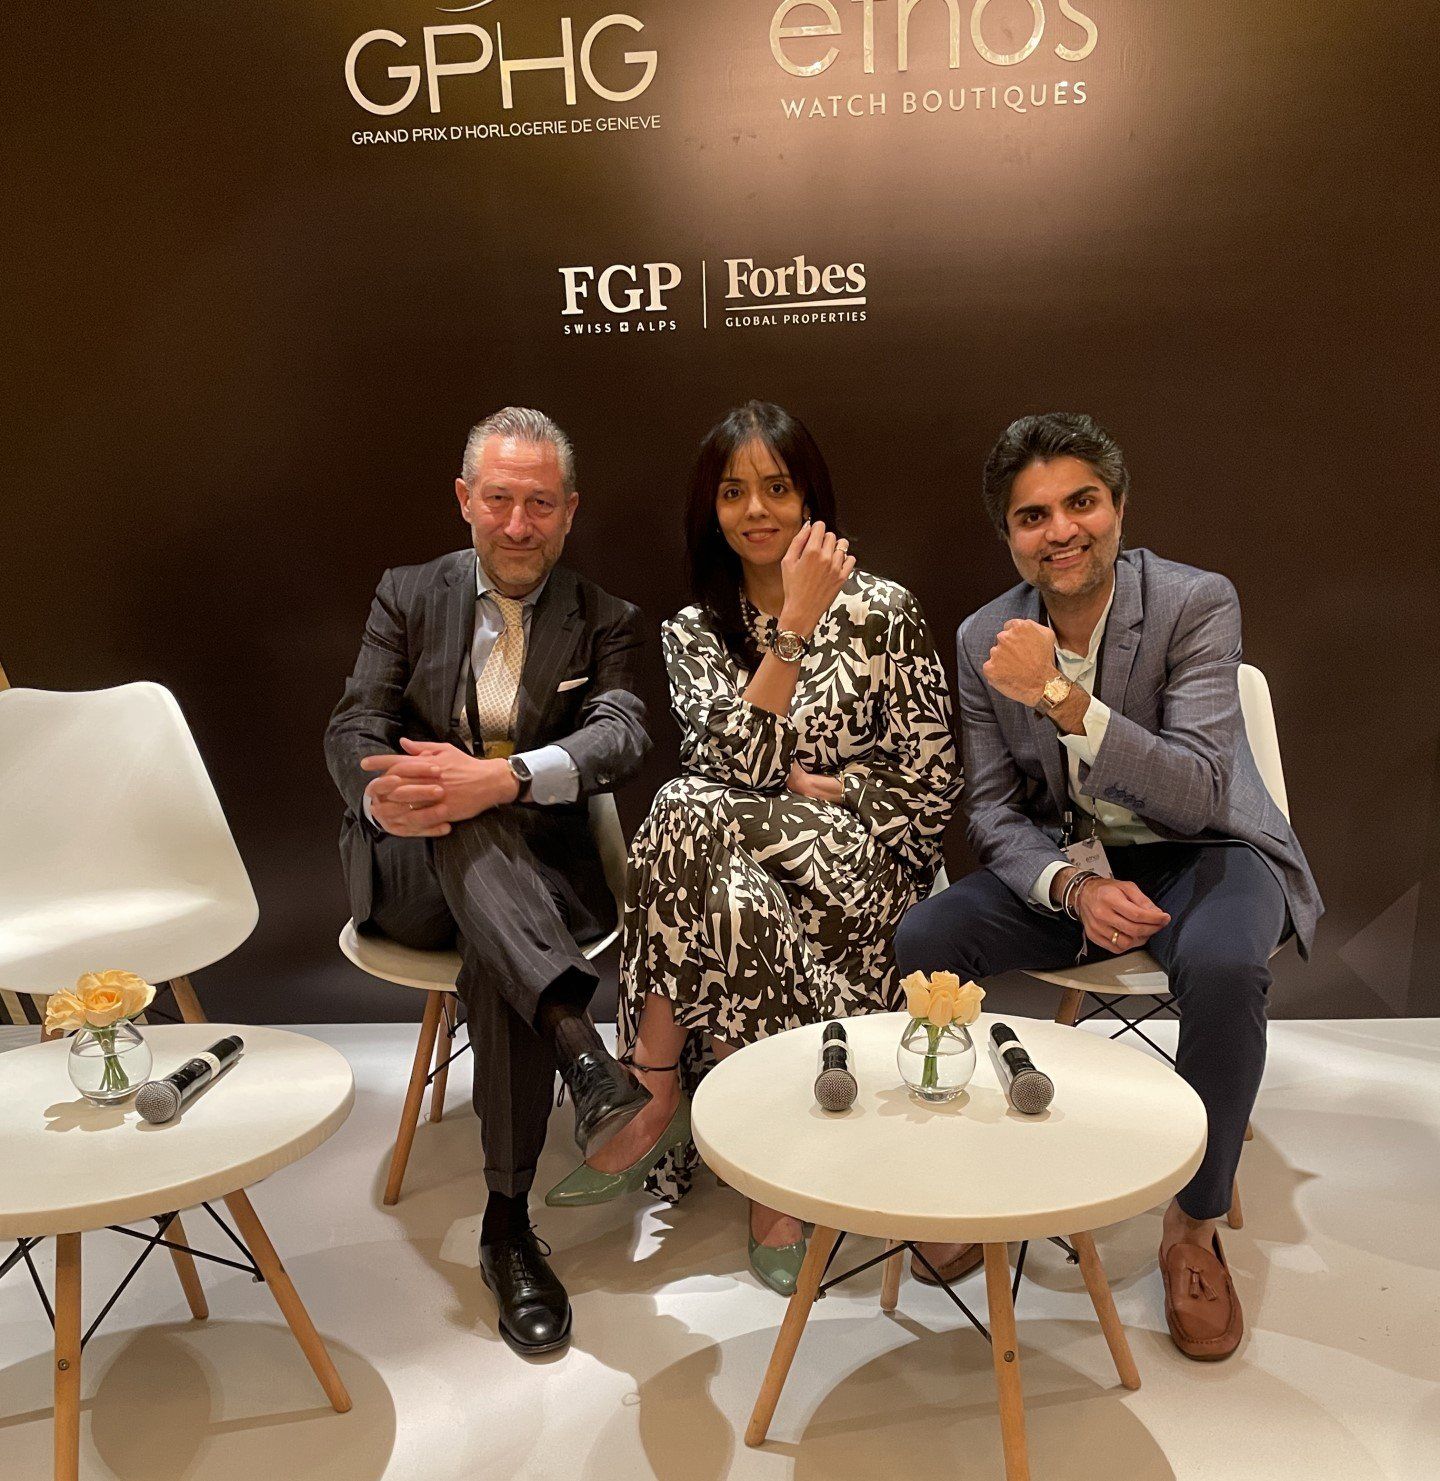 Aurel Bacs with his Ellipse, Karishma Karer with the MAD 1 & Punit Mehta with his vintage Omega at the GPHG exhibit in Delhi.